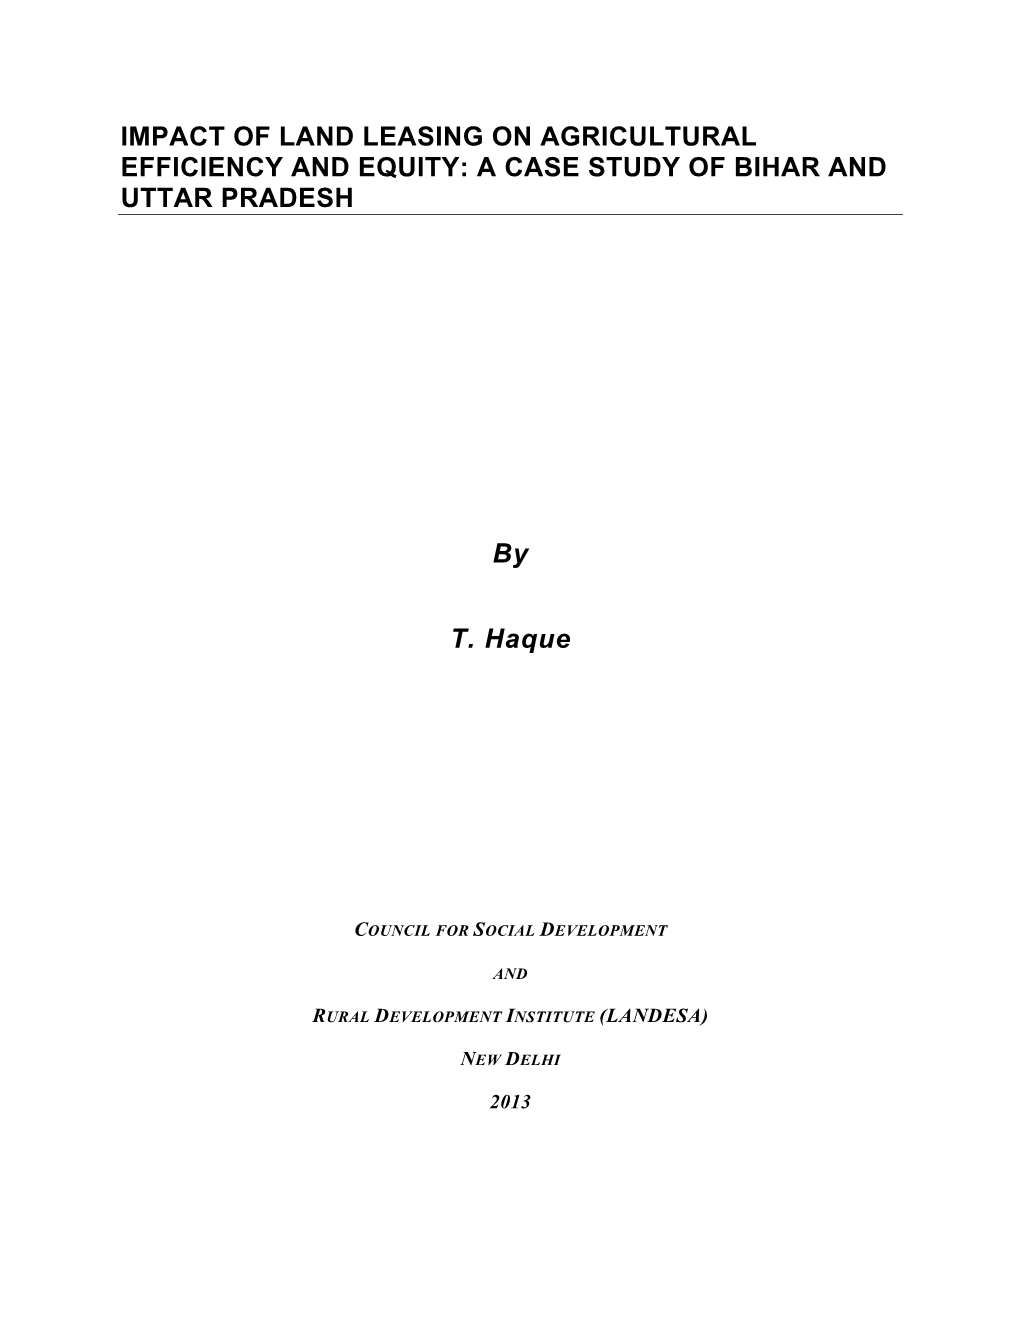 Impact of Land Leasing on Agricultural Efficiency and Equity: a Case Study of Bihar and Uttar Pradesh